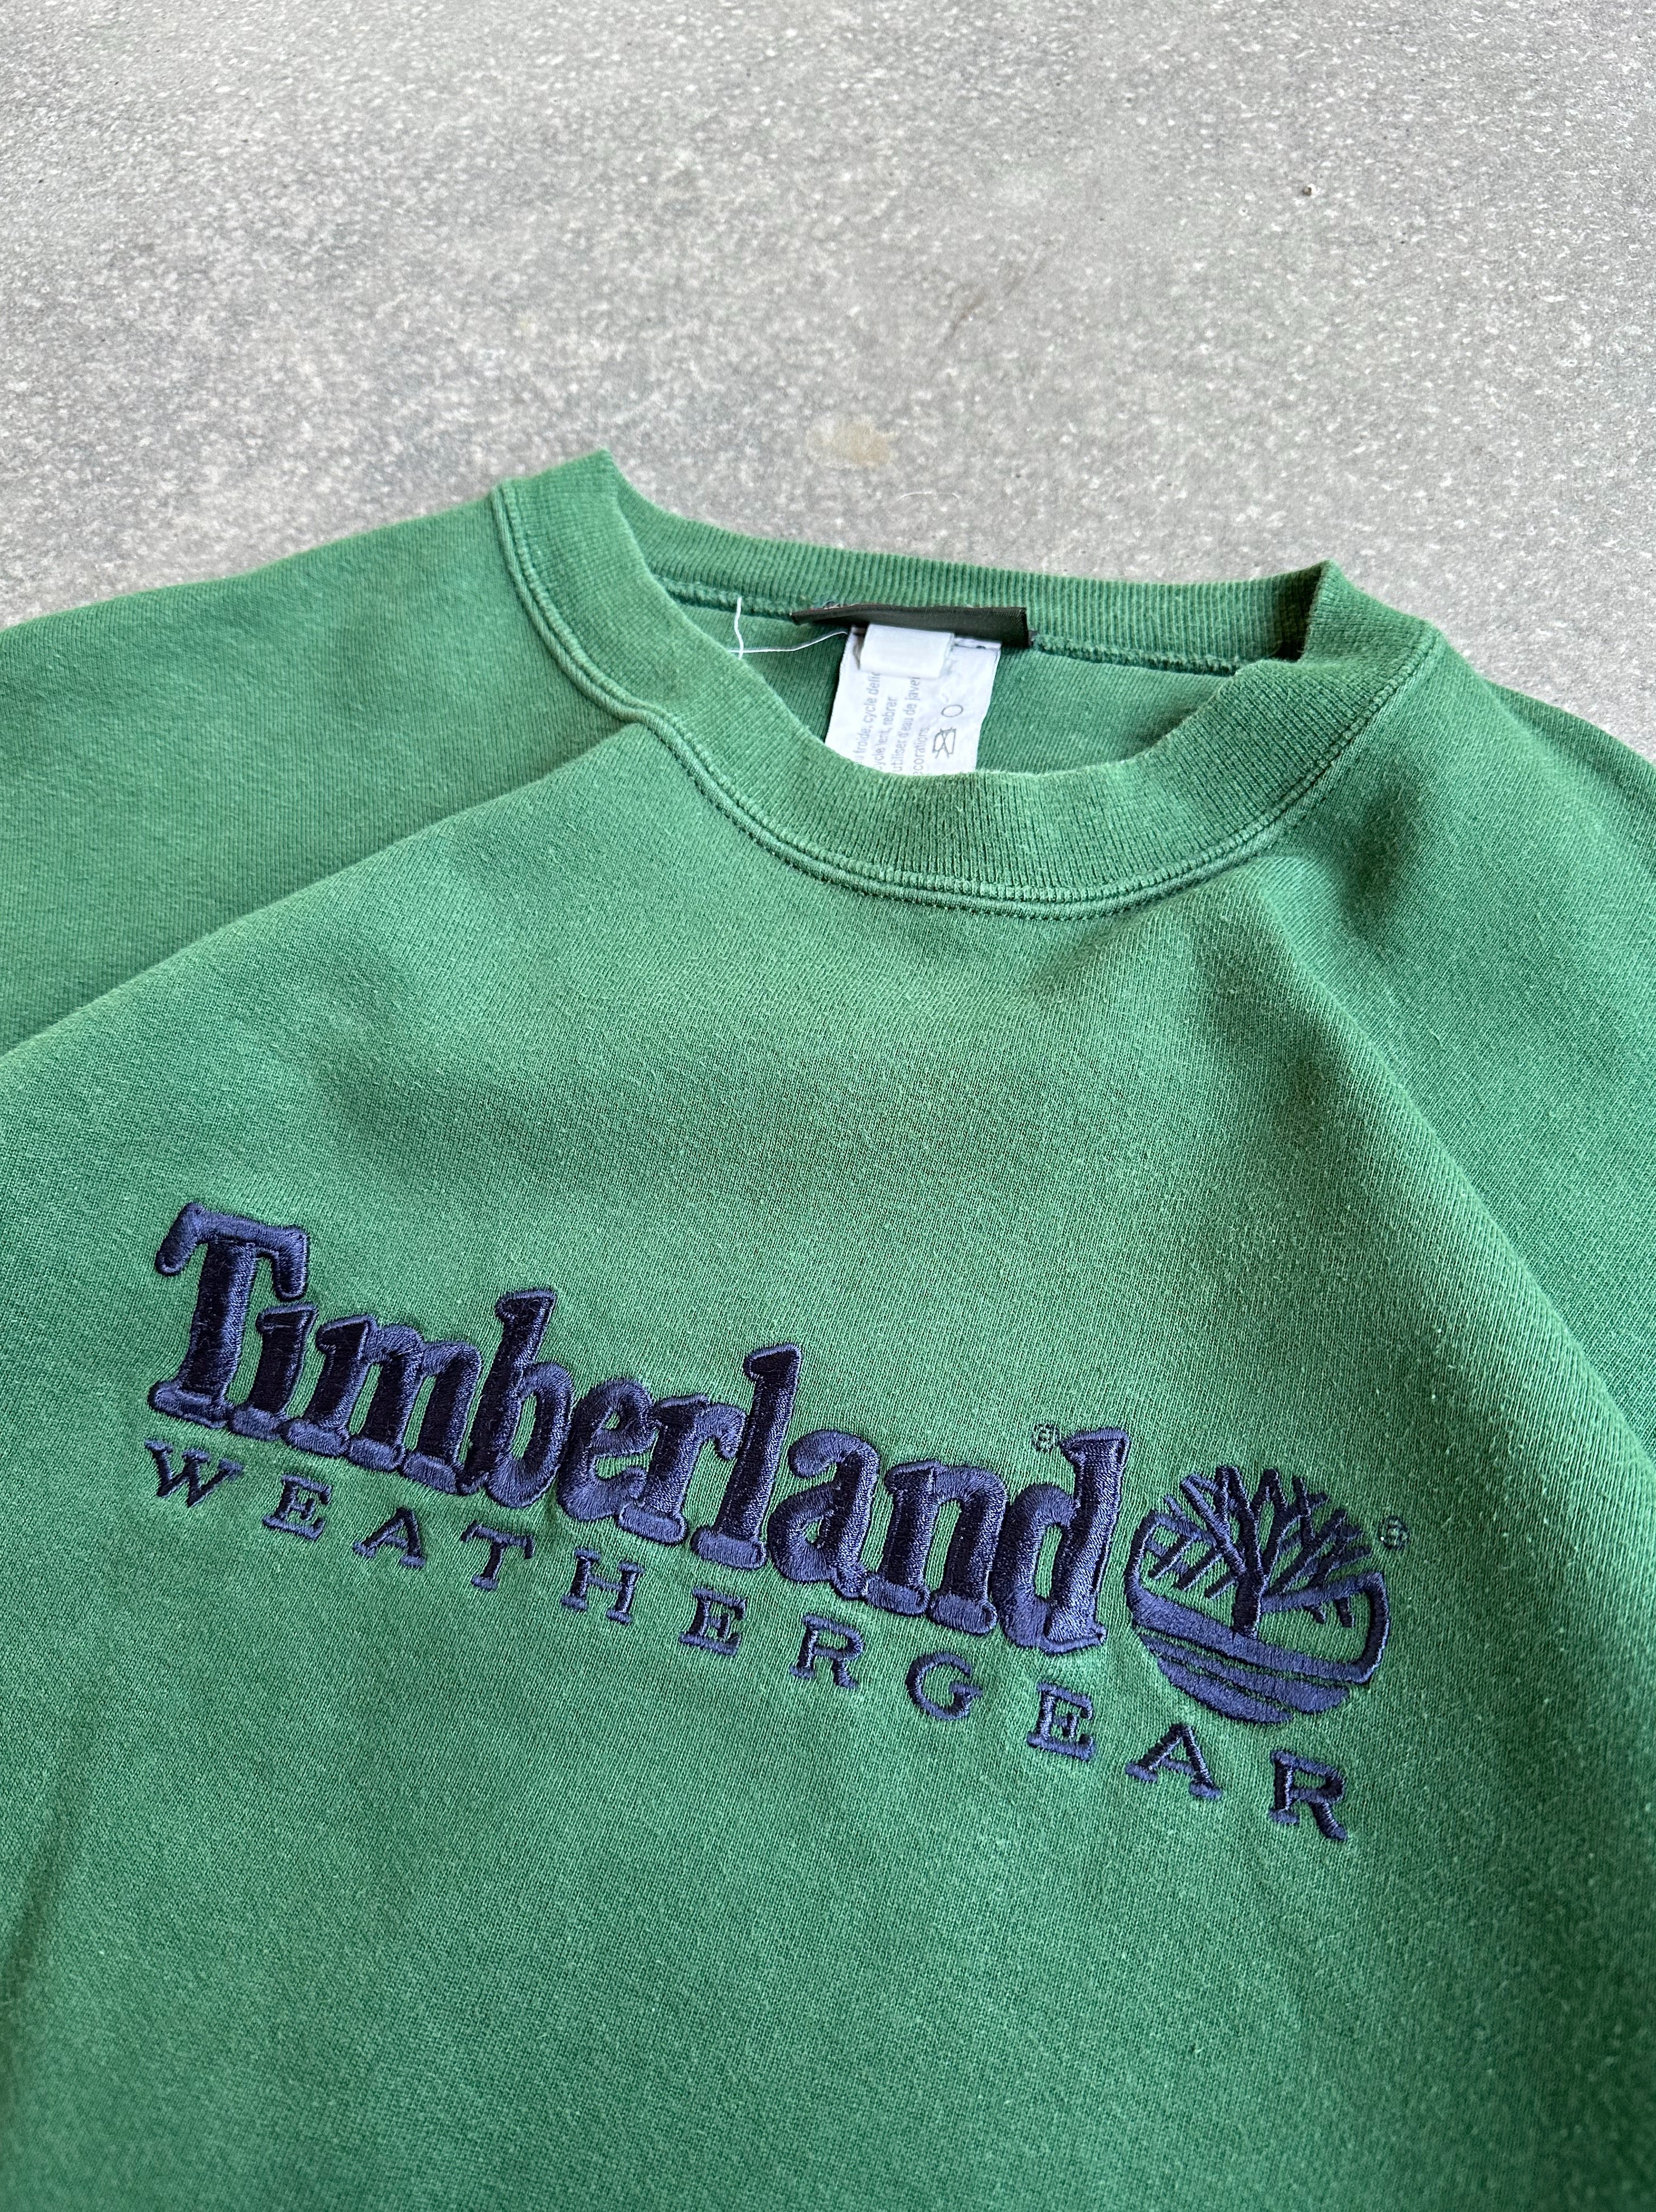 Vintage 'Made in USA' Timberland Weathergear Sweater - Large/Extra Large